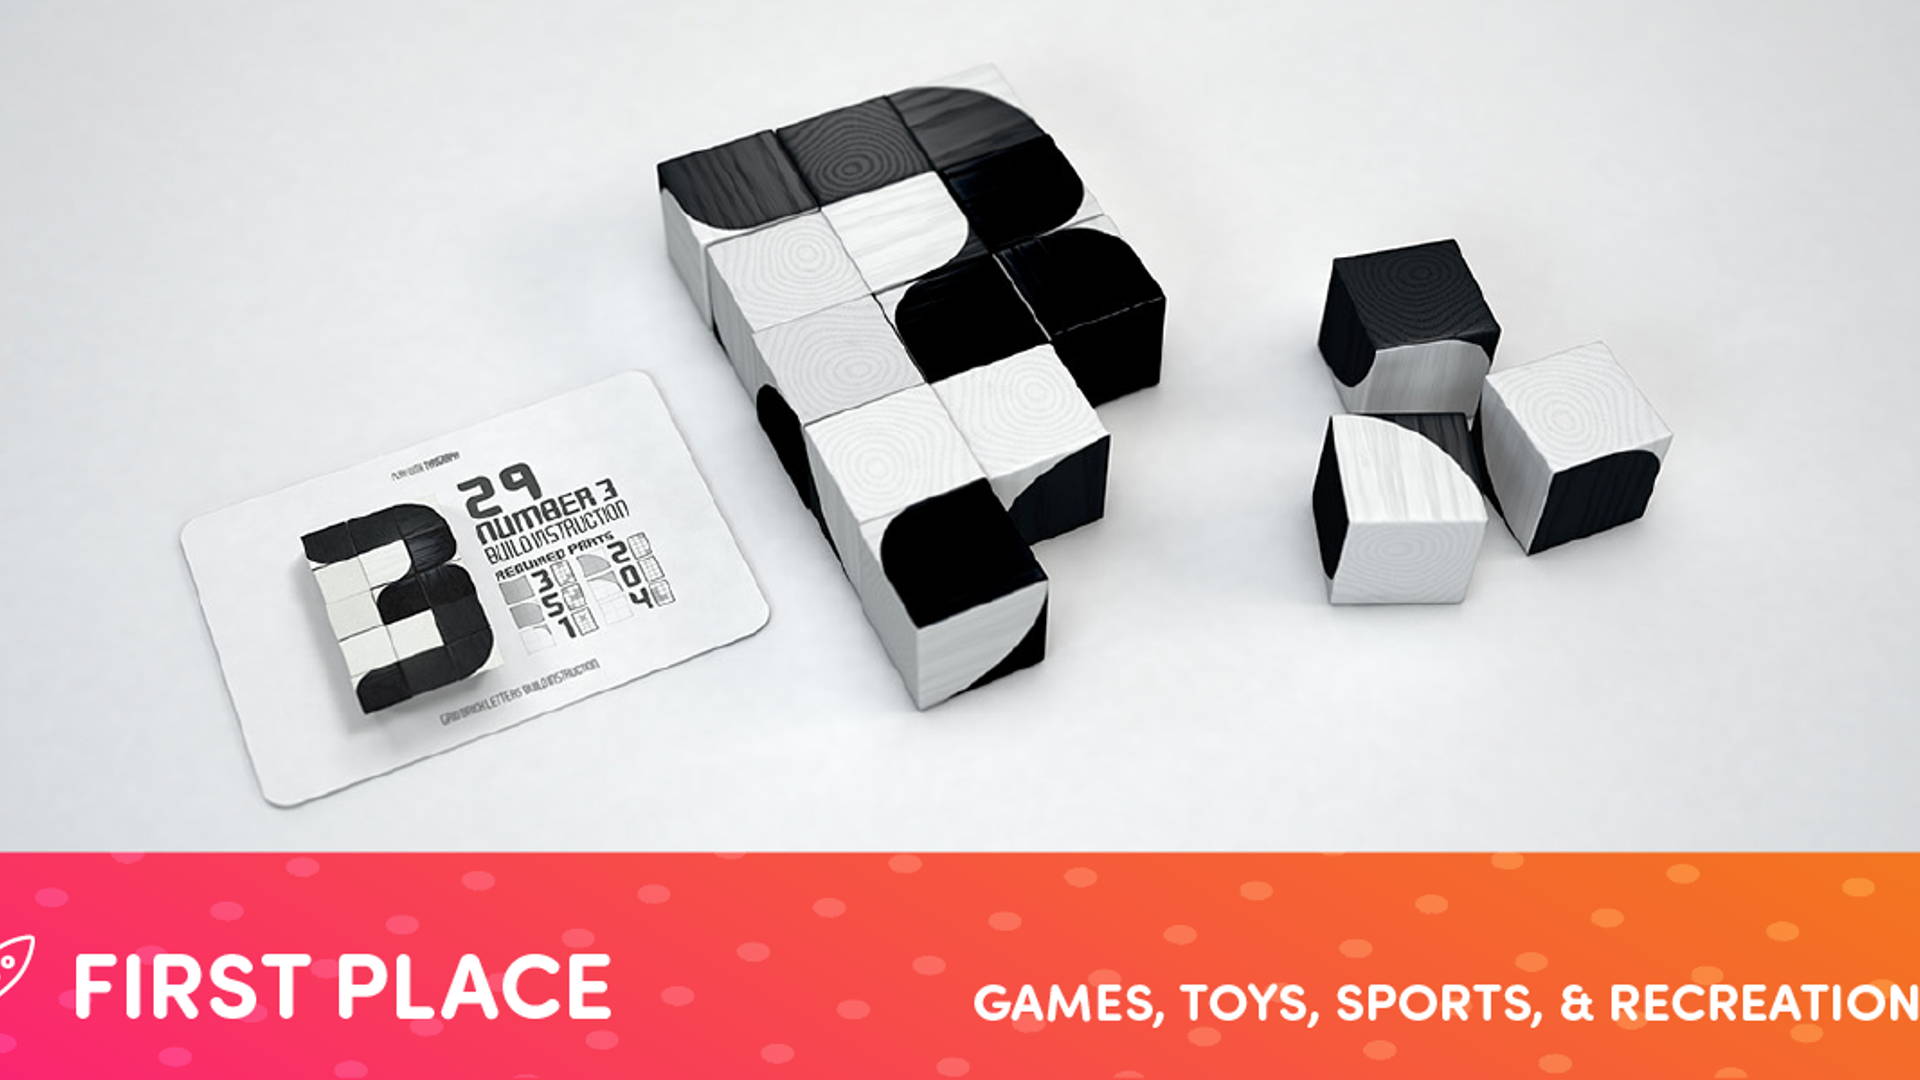 Featured image for 2015 CWWWR AWARD WINNER: 1ST PLACE GAMES, TOYS, SPORTS, & RECREATIONAL - GRID BRICK